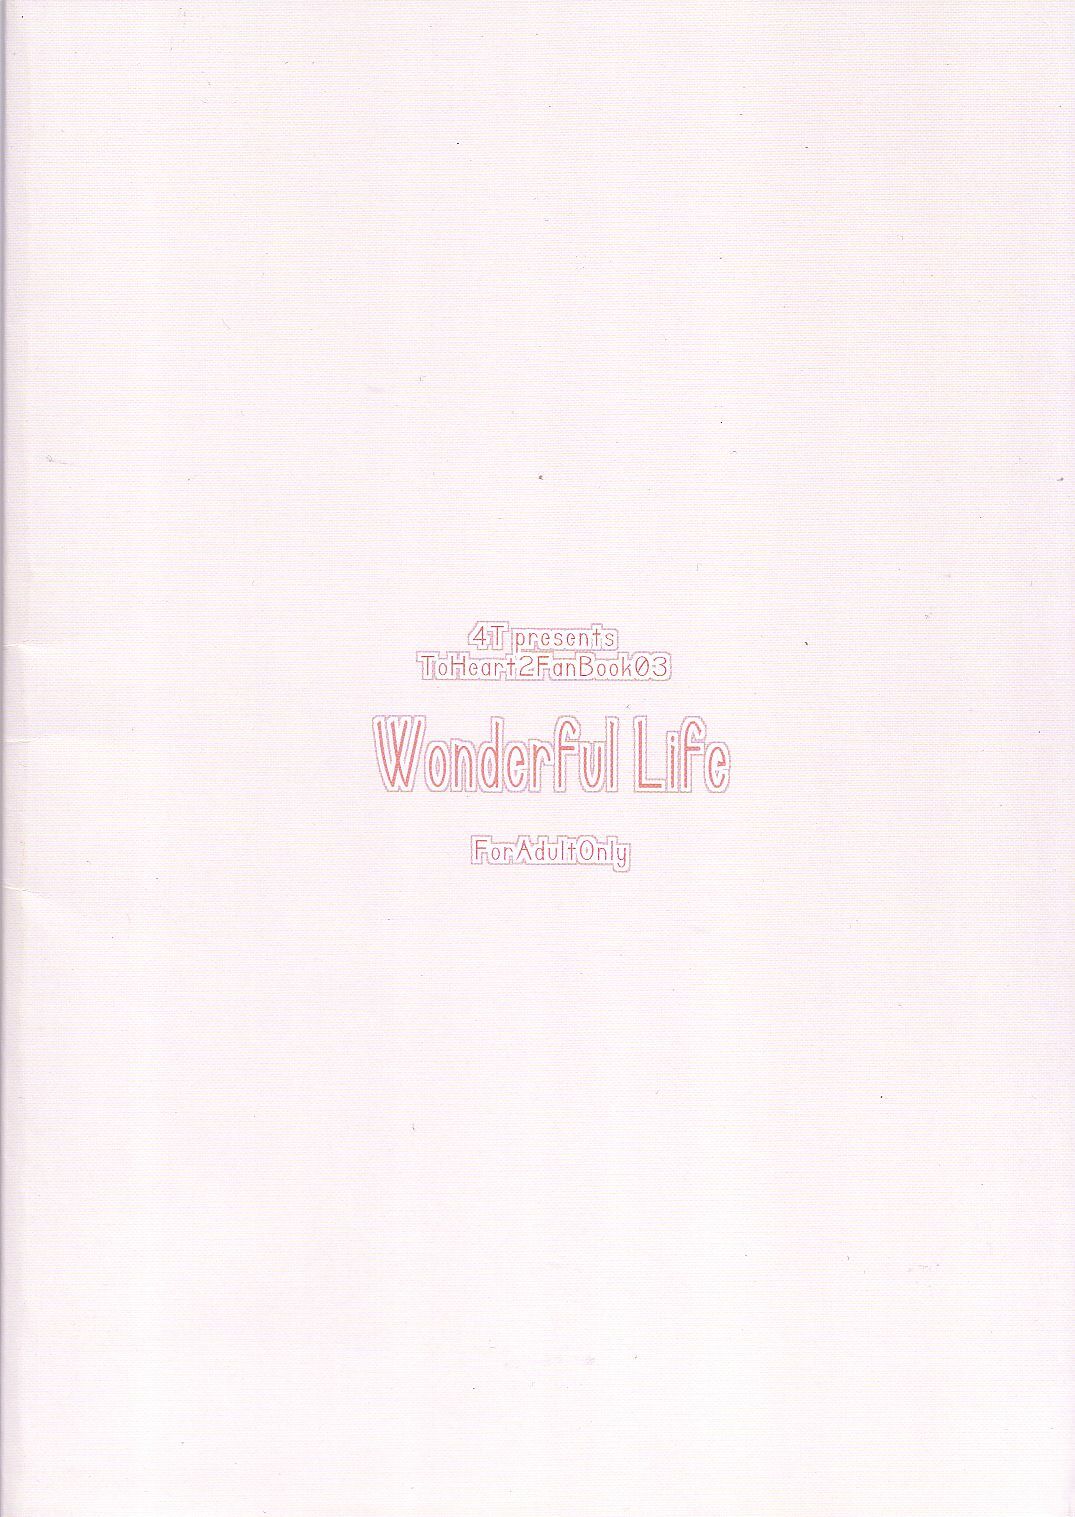 [4T] Wonderful Life (To Heart 2) page 18 full